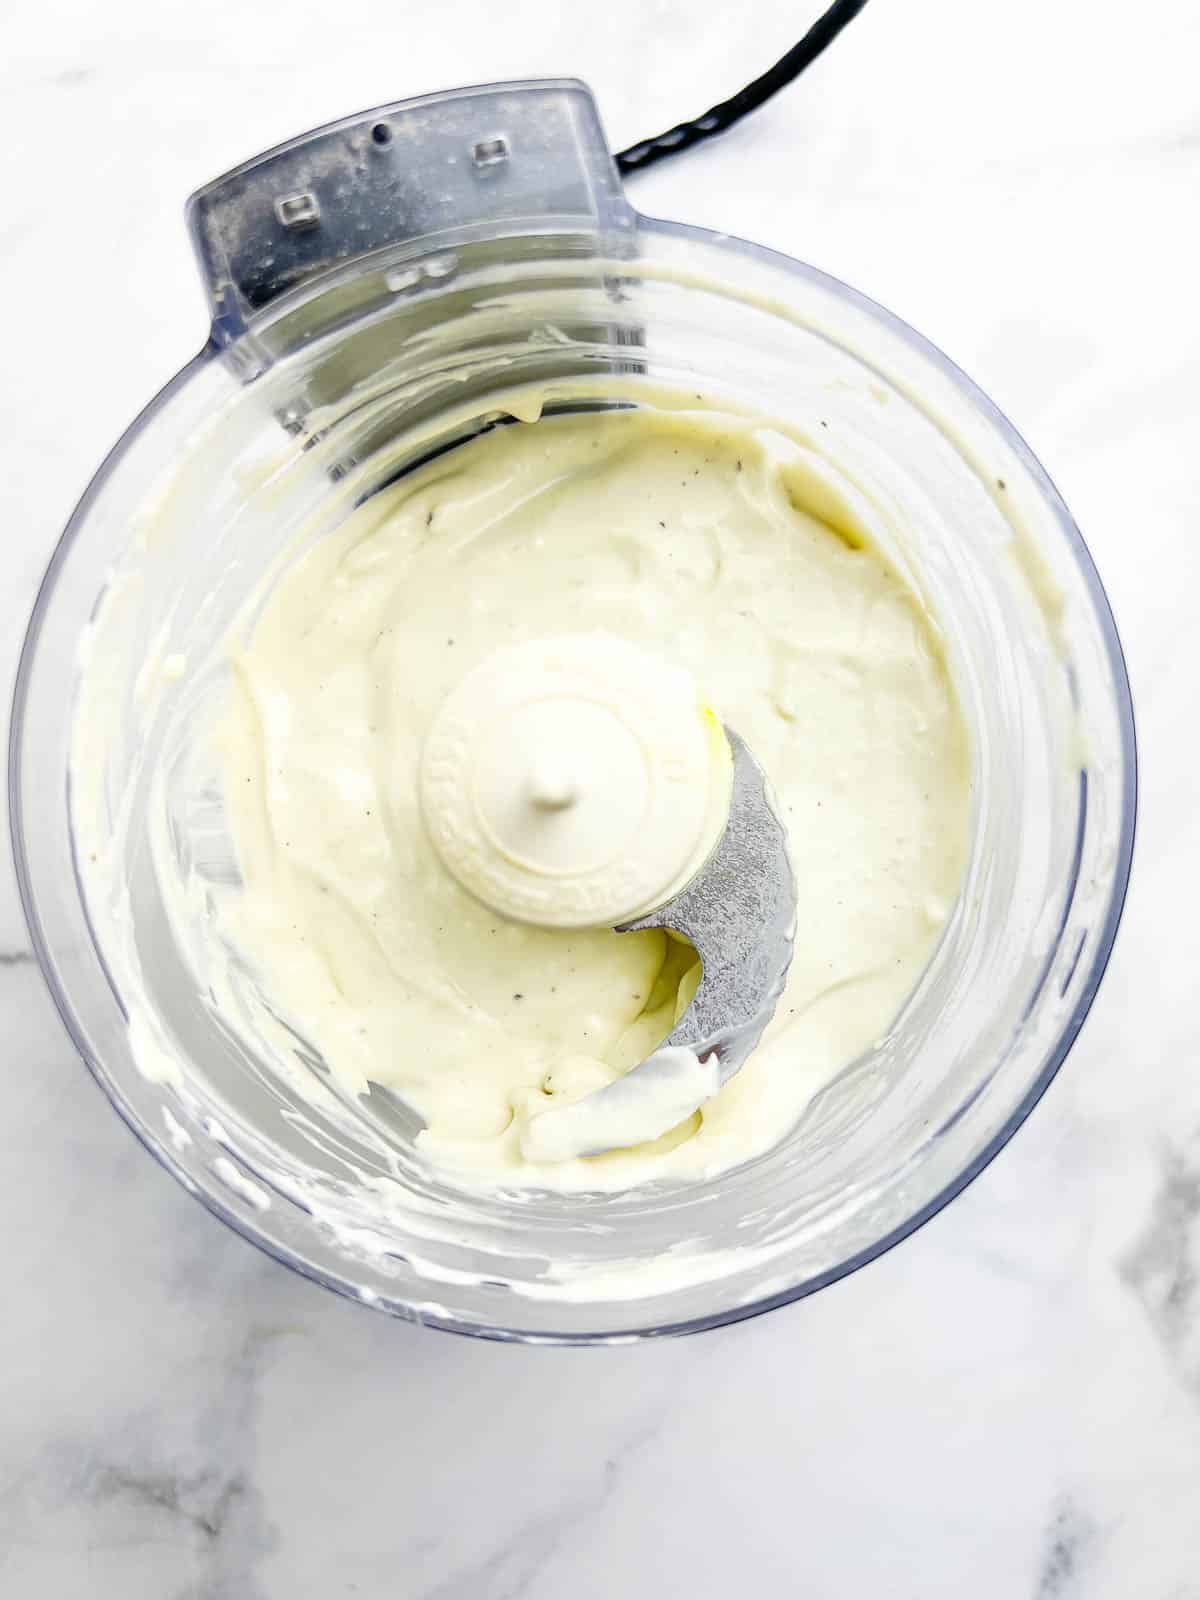 For a smooth and creamy gorgonzola dressing, combine ingredients in a mini food processor.